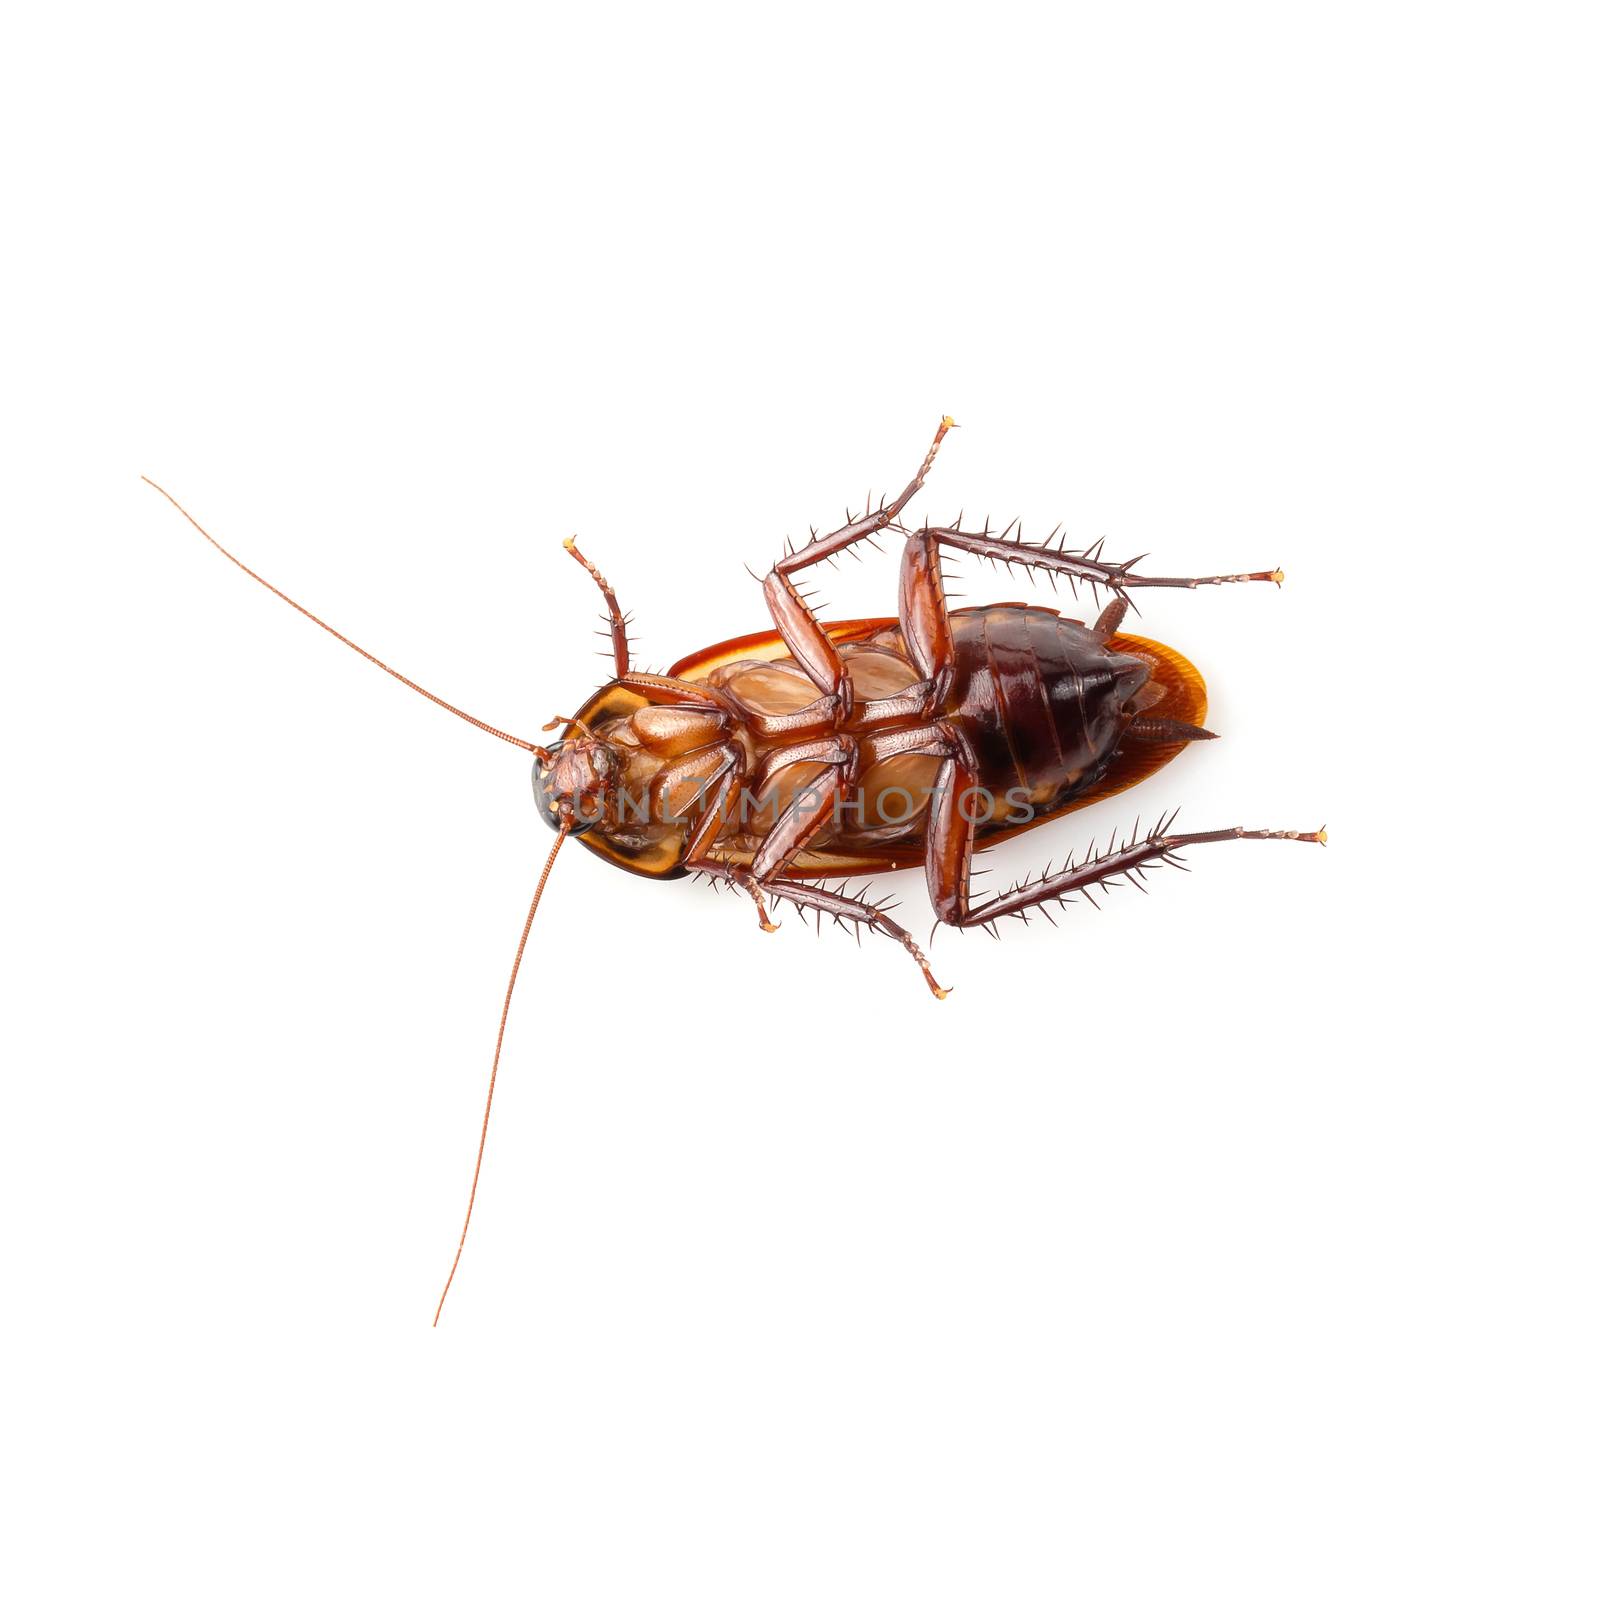 close-up cockroach isolated over a white background by kaiskynet